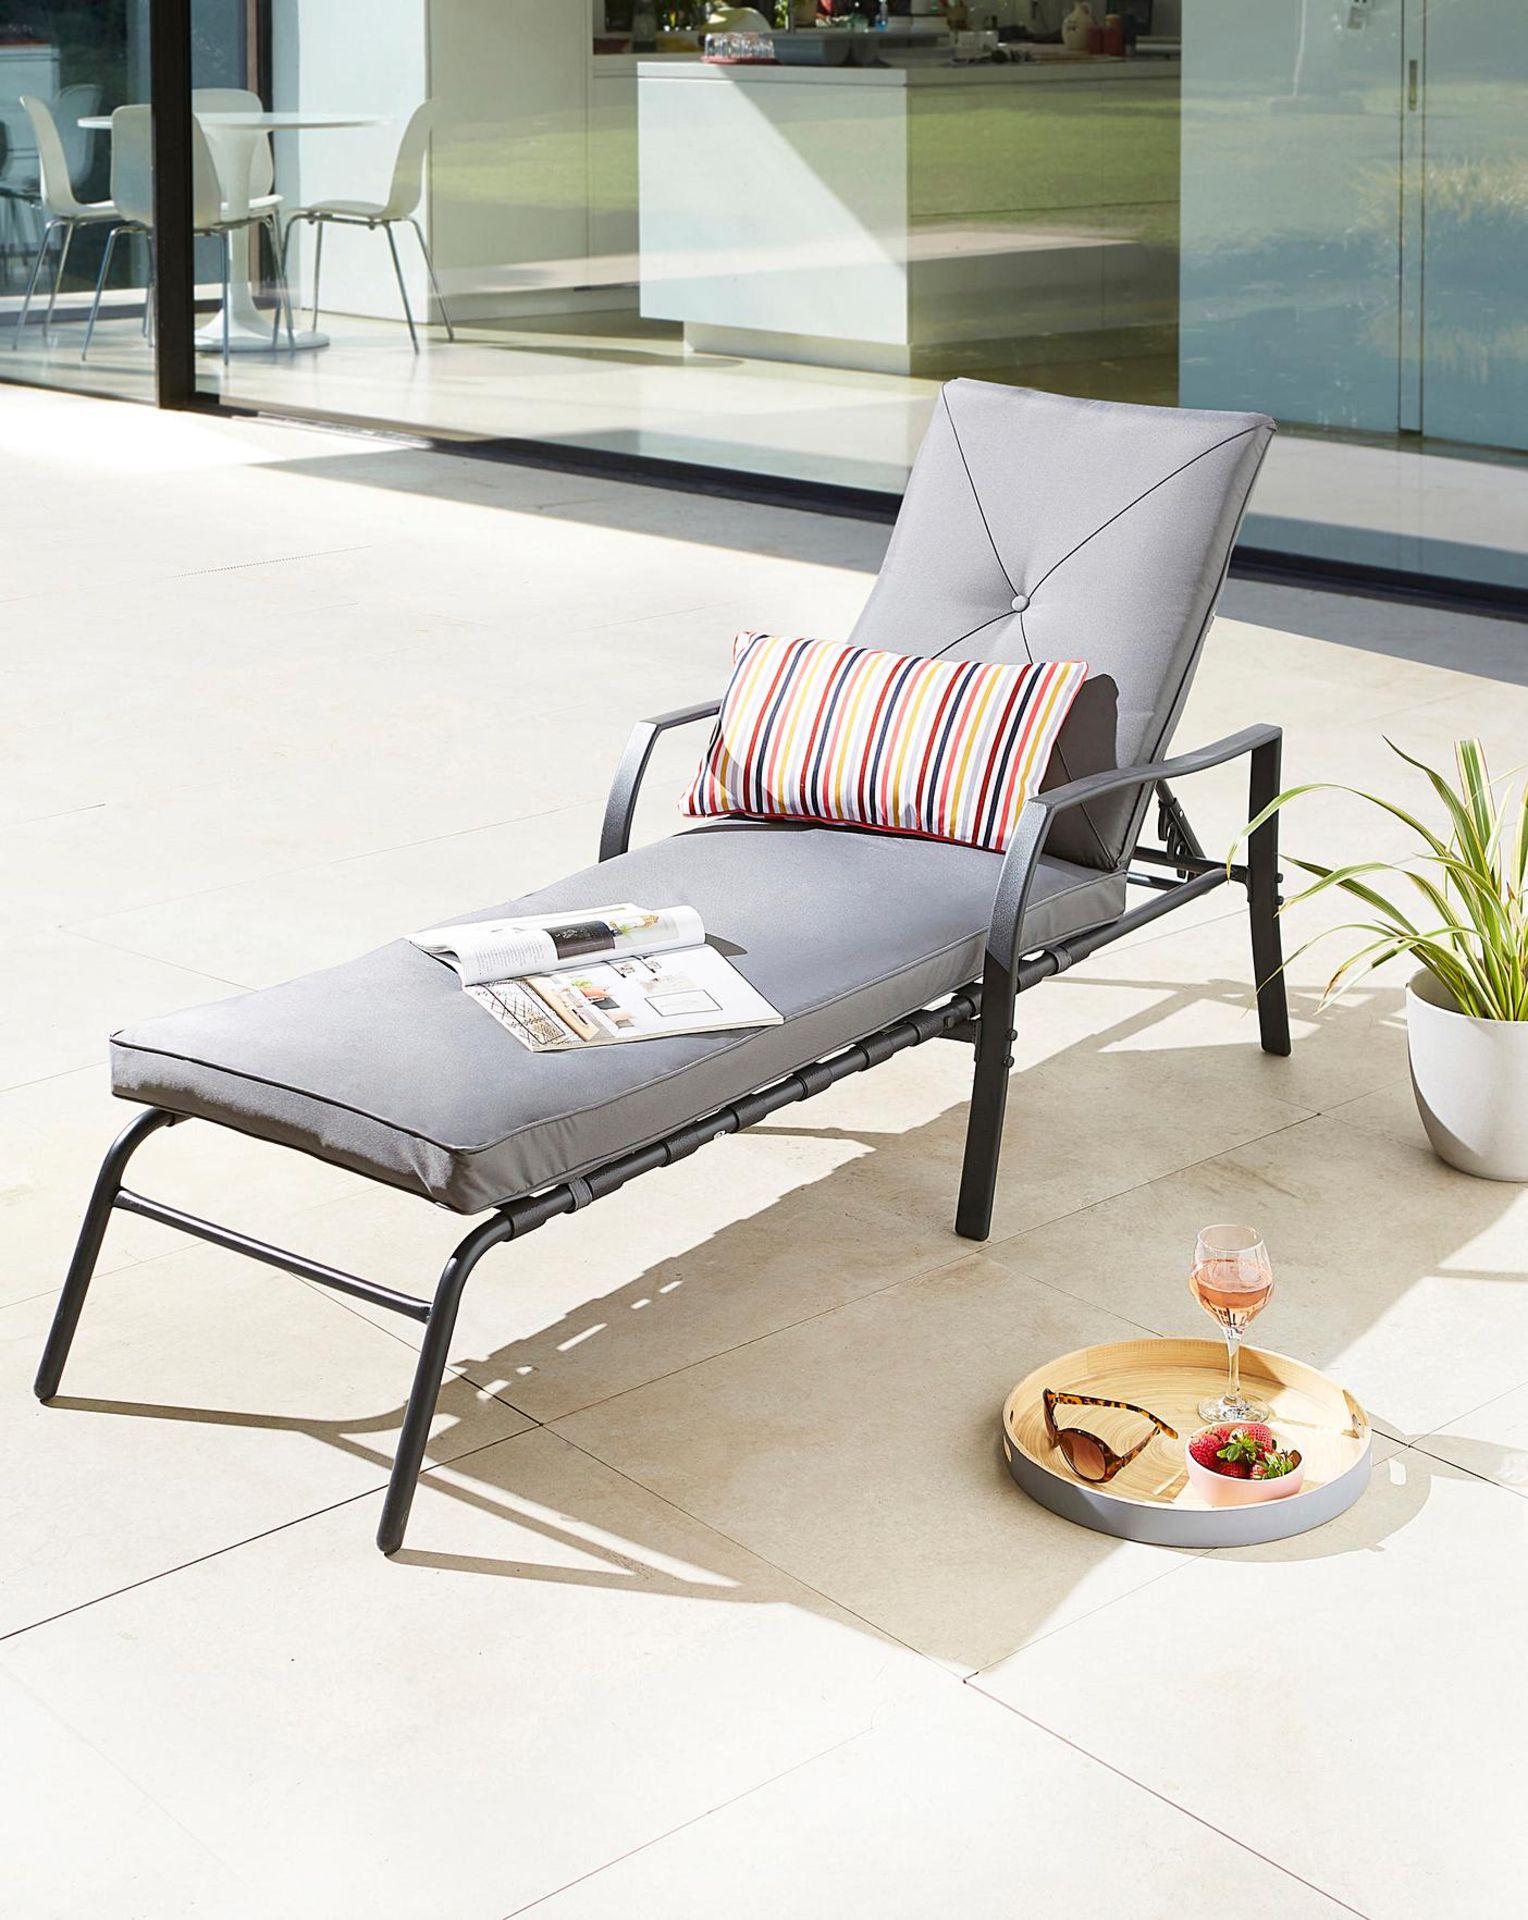 Brand New Luxury Siena Lounger. RRP £199 R18.1Siena lounger is durable and weather resistant.store